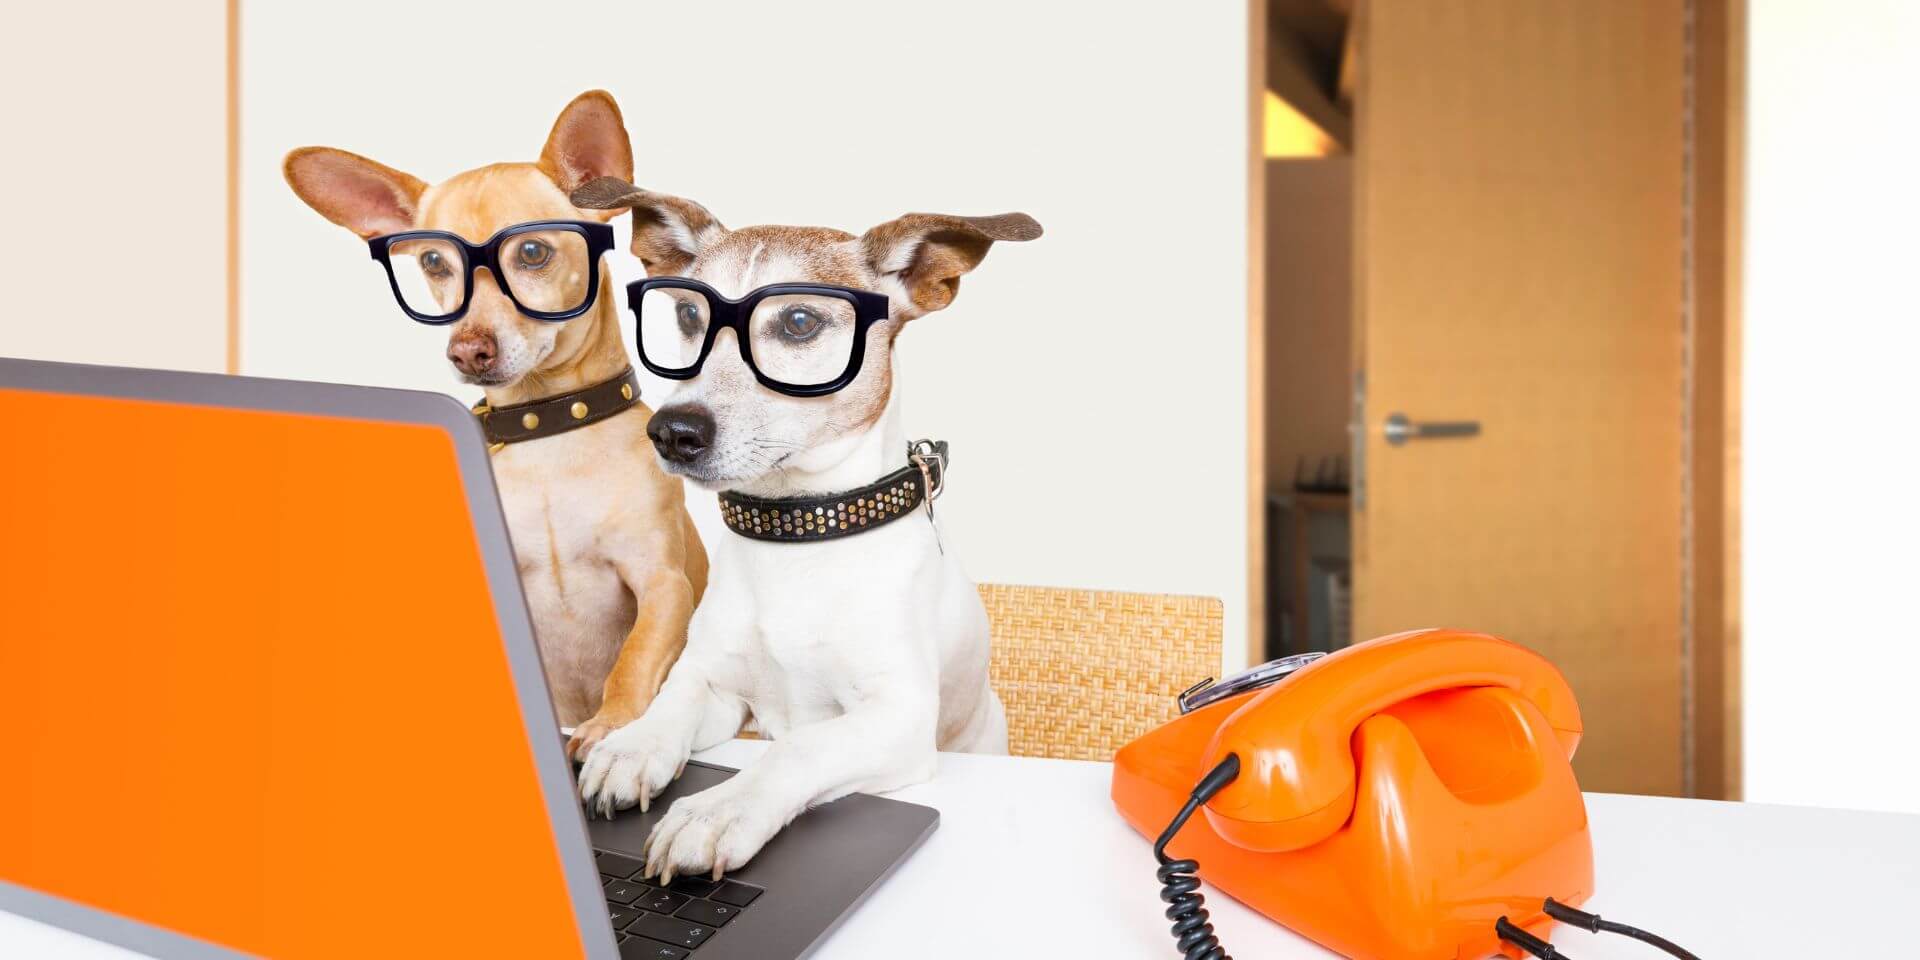 two dogs looking at an orange computer